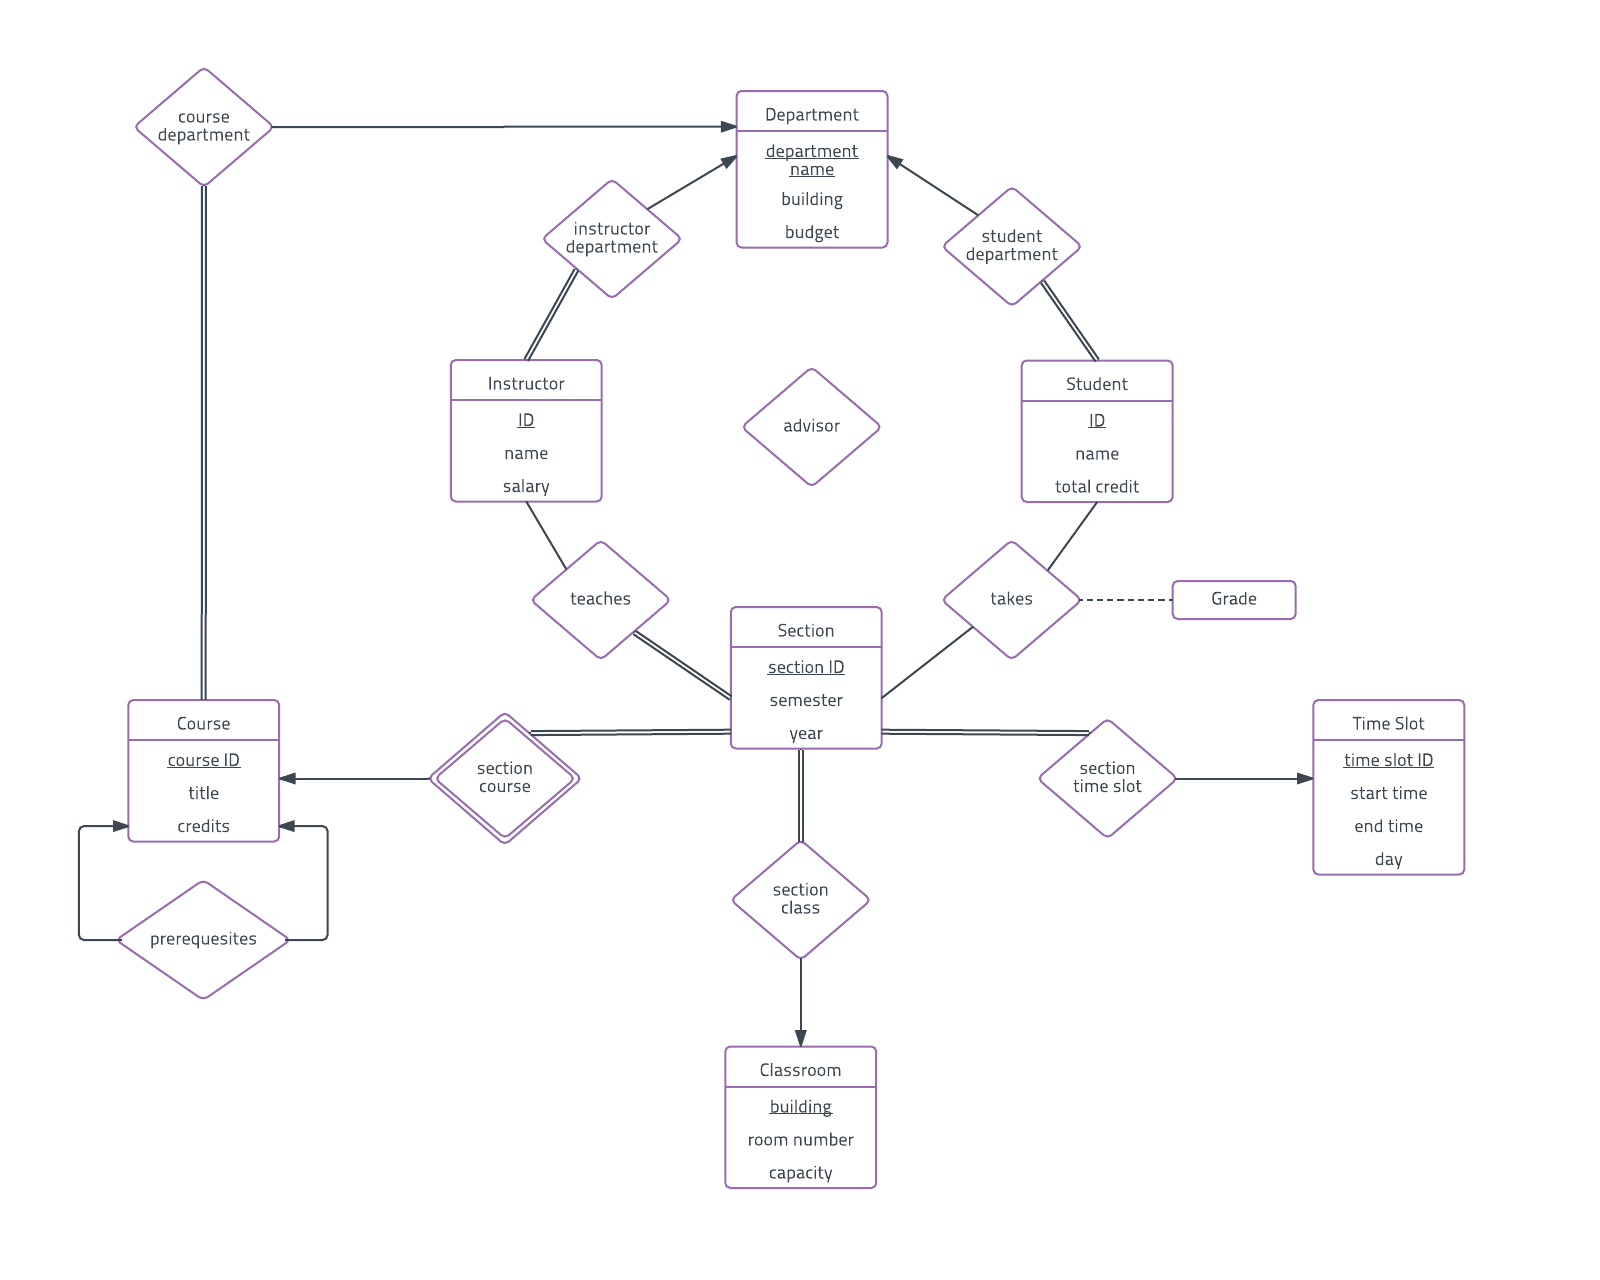 Er Diagram Examples And Templates | Lucidchart in Simple Er Diagram